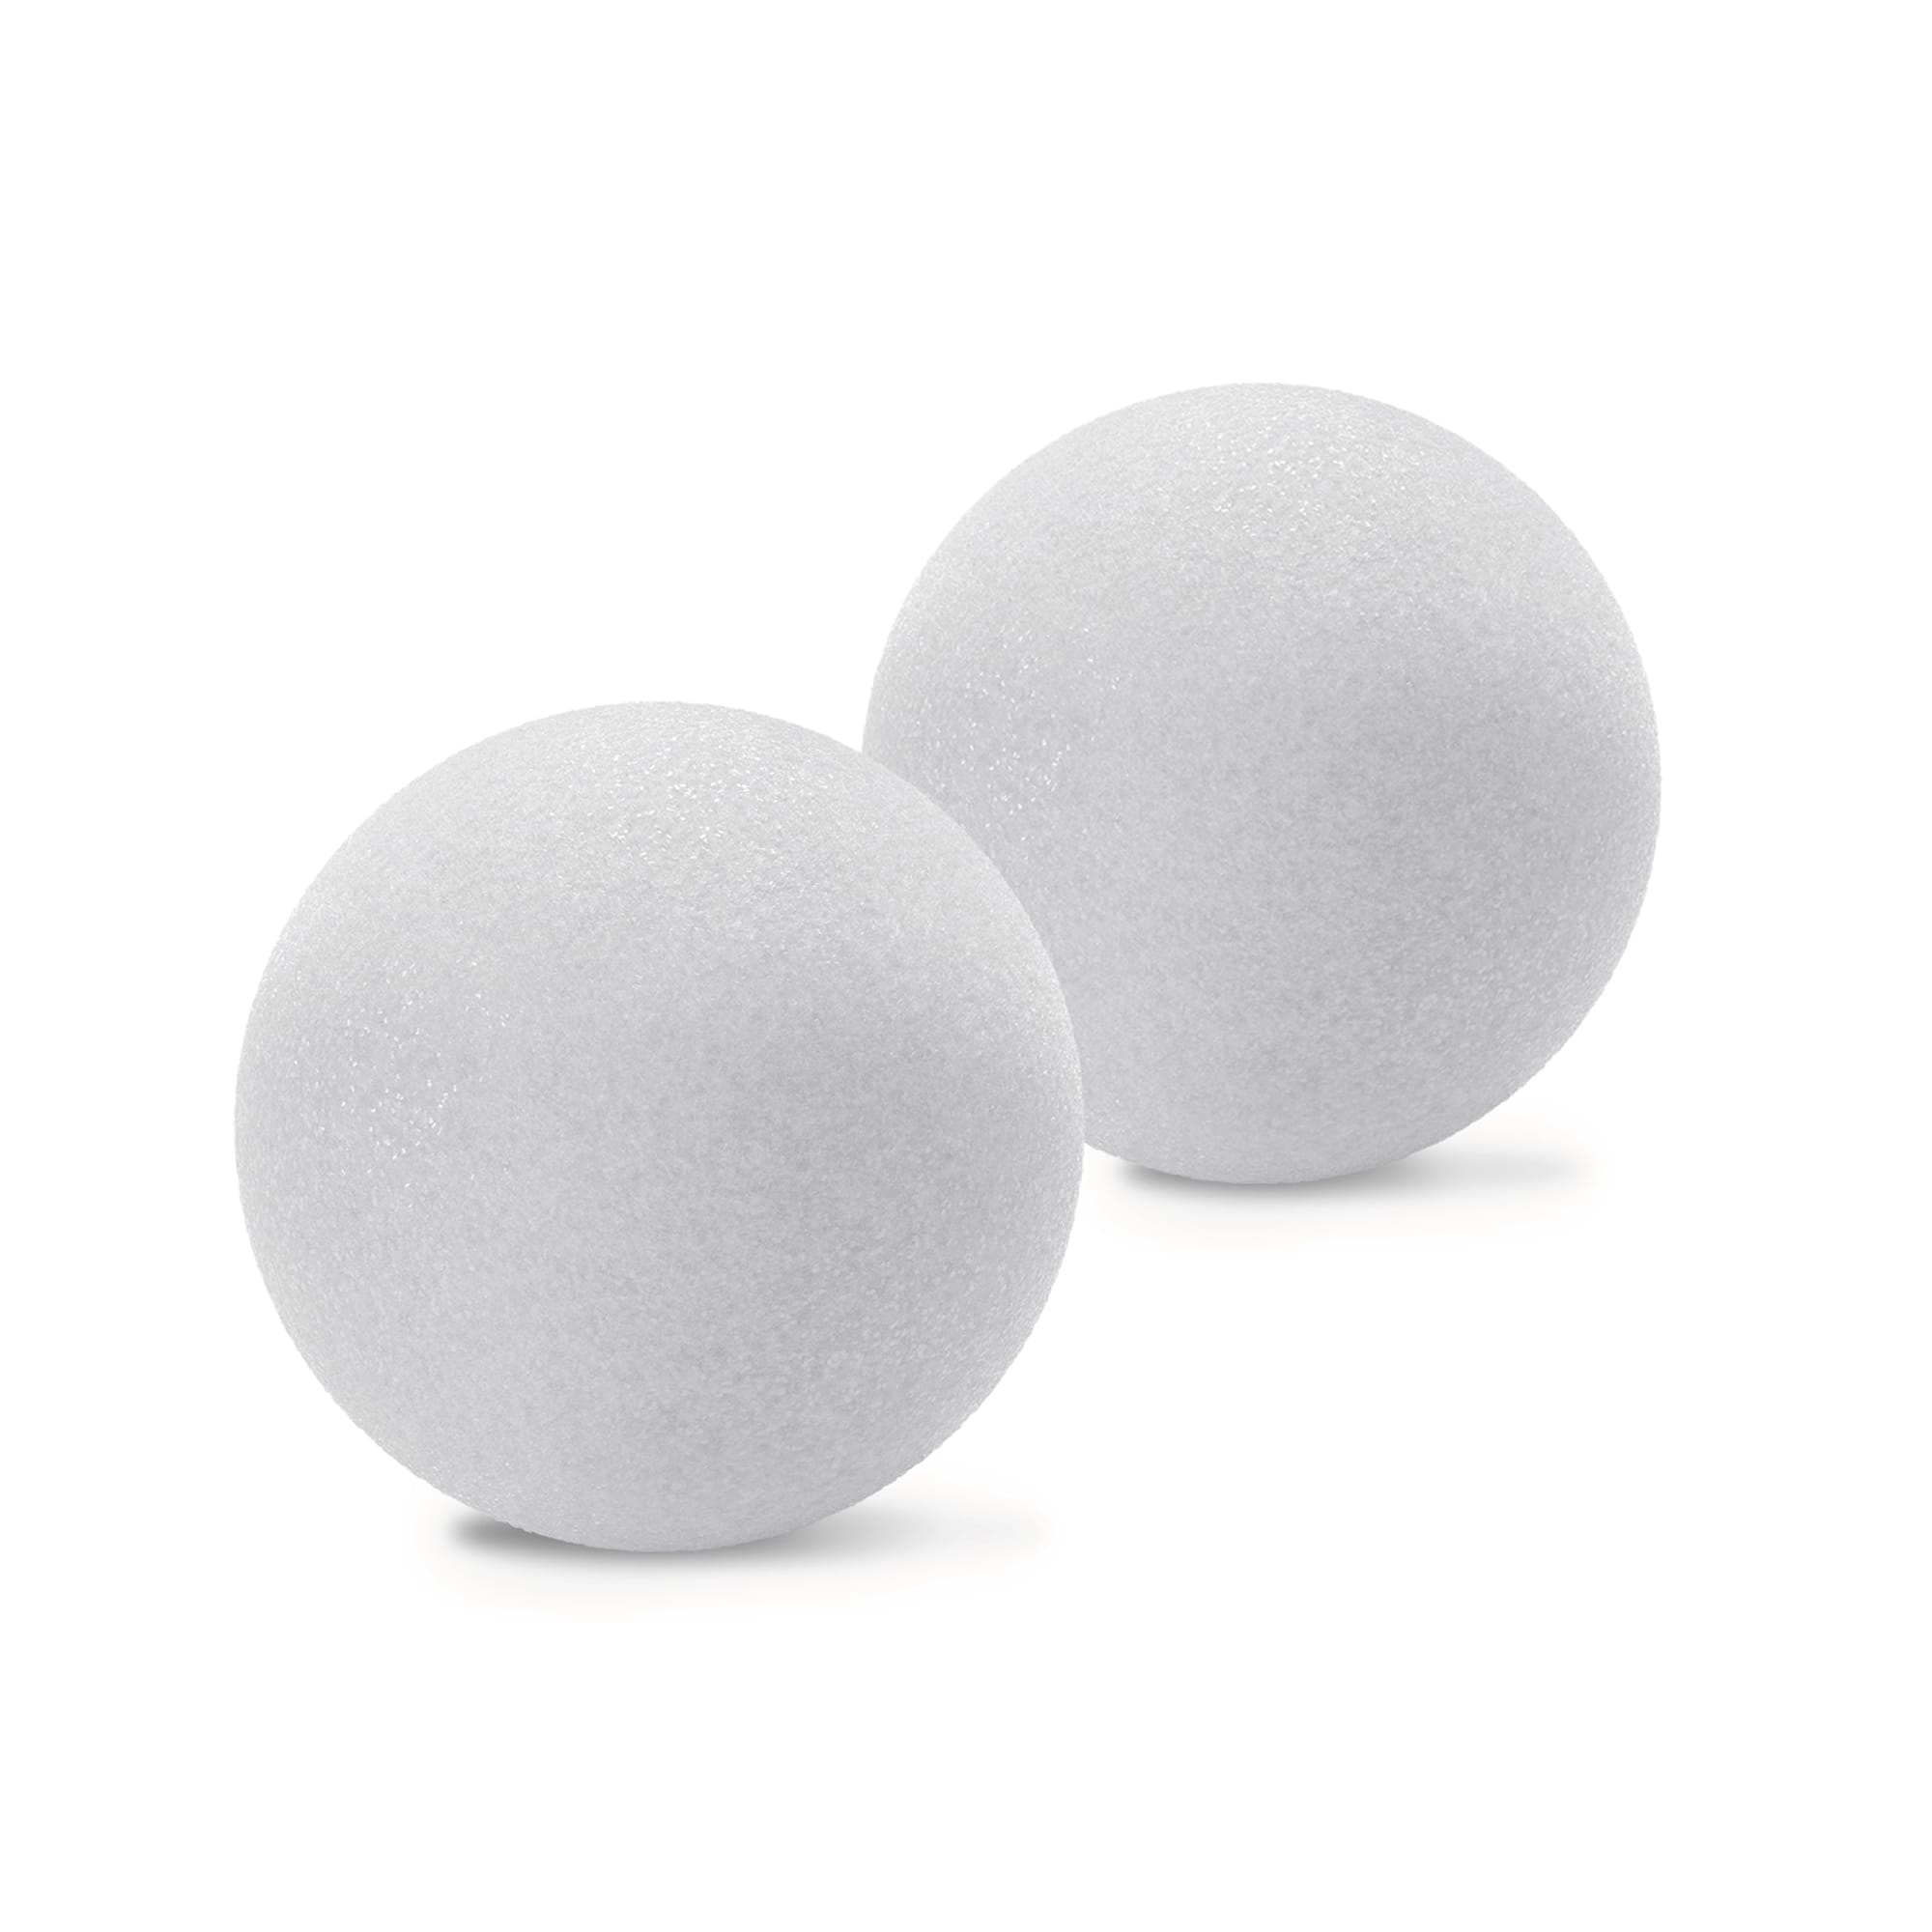 Juvale 4 Inch Foam Balls For Crafts - 12 Pack Round White Polystyrene  Spheres For Diy Projects, School Modeling : Target